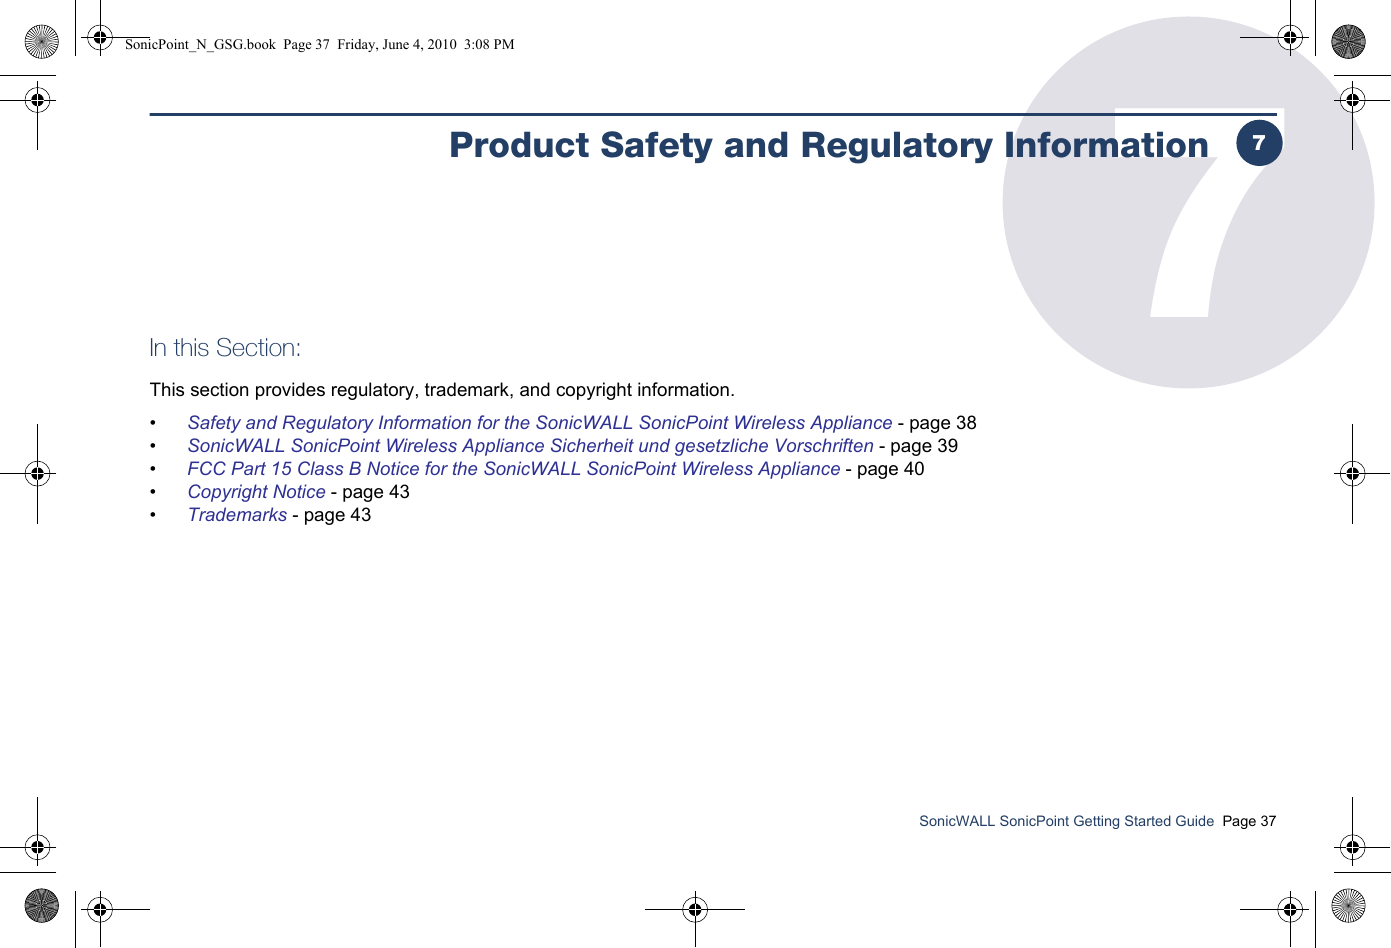 SonicWALL SonicPoint Getting Started Guide  Page 377Product Safety and Regulatory InformationIn this Section:This section provides regulatory, trademark, and copyright information.•Safety and Regulatory Information for the SonicWALL SonicPoint Wireless Appliance - page 38•SonicWALL SonicPoint Wireless Appliance Sicherheit und gesetzliche Vorschriften - page 39•FCC Part 15 Class B Notice for the SonicWALL SonicPoint Wireless Appliance - page 40•Copyright Notice - page 43•Trademarks - page 437SonicPoint_N_GSG.book  Page 37  Friday, June 4, 2010  3:08 PM